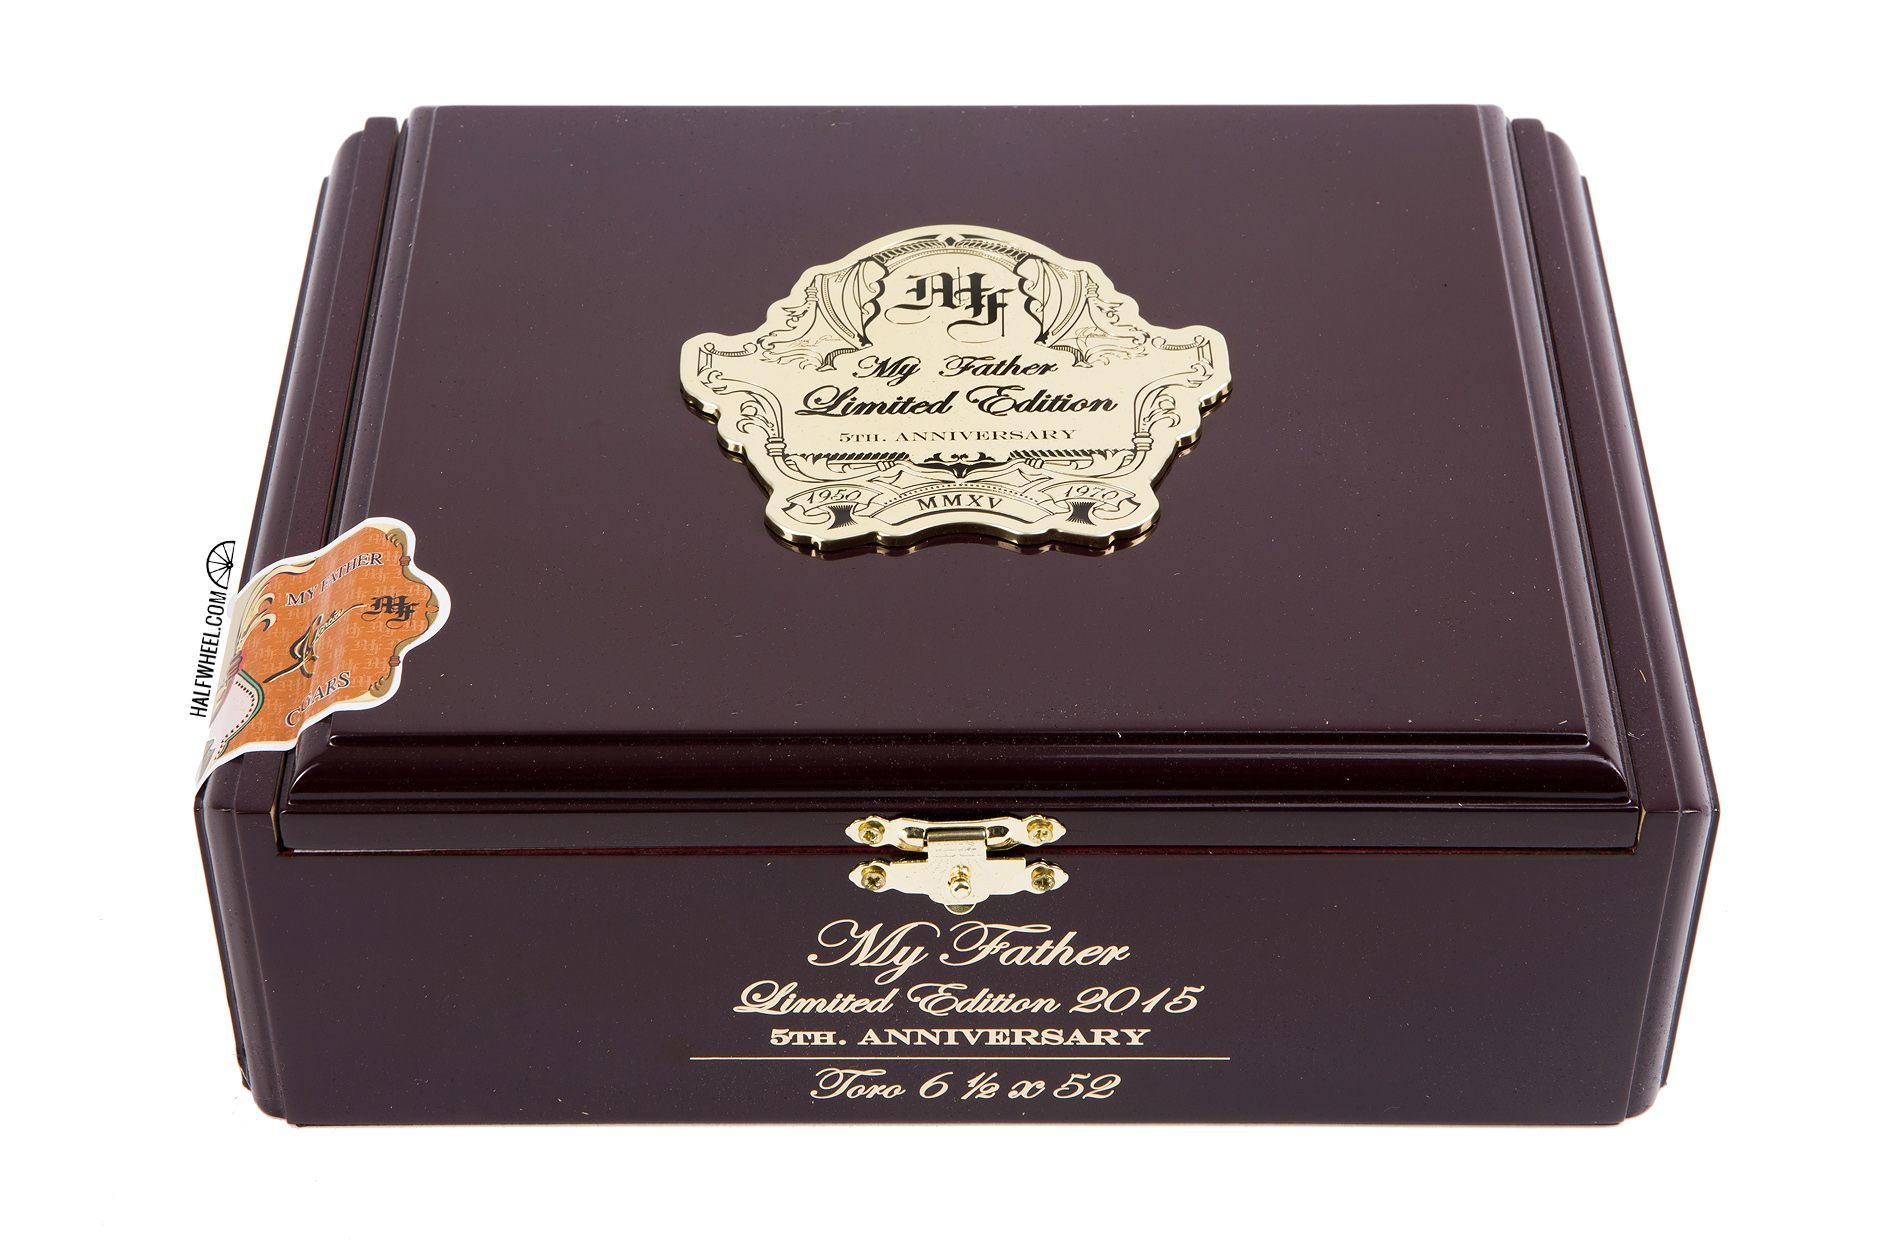 My Father Limited Edition 2015 5th. Anniversary Box 1